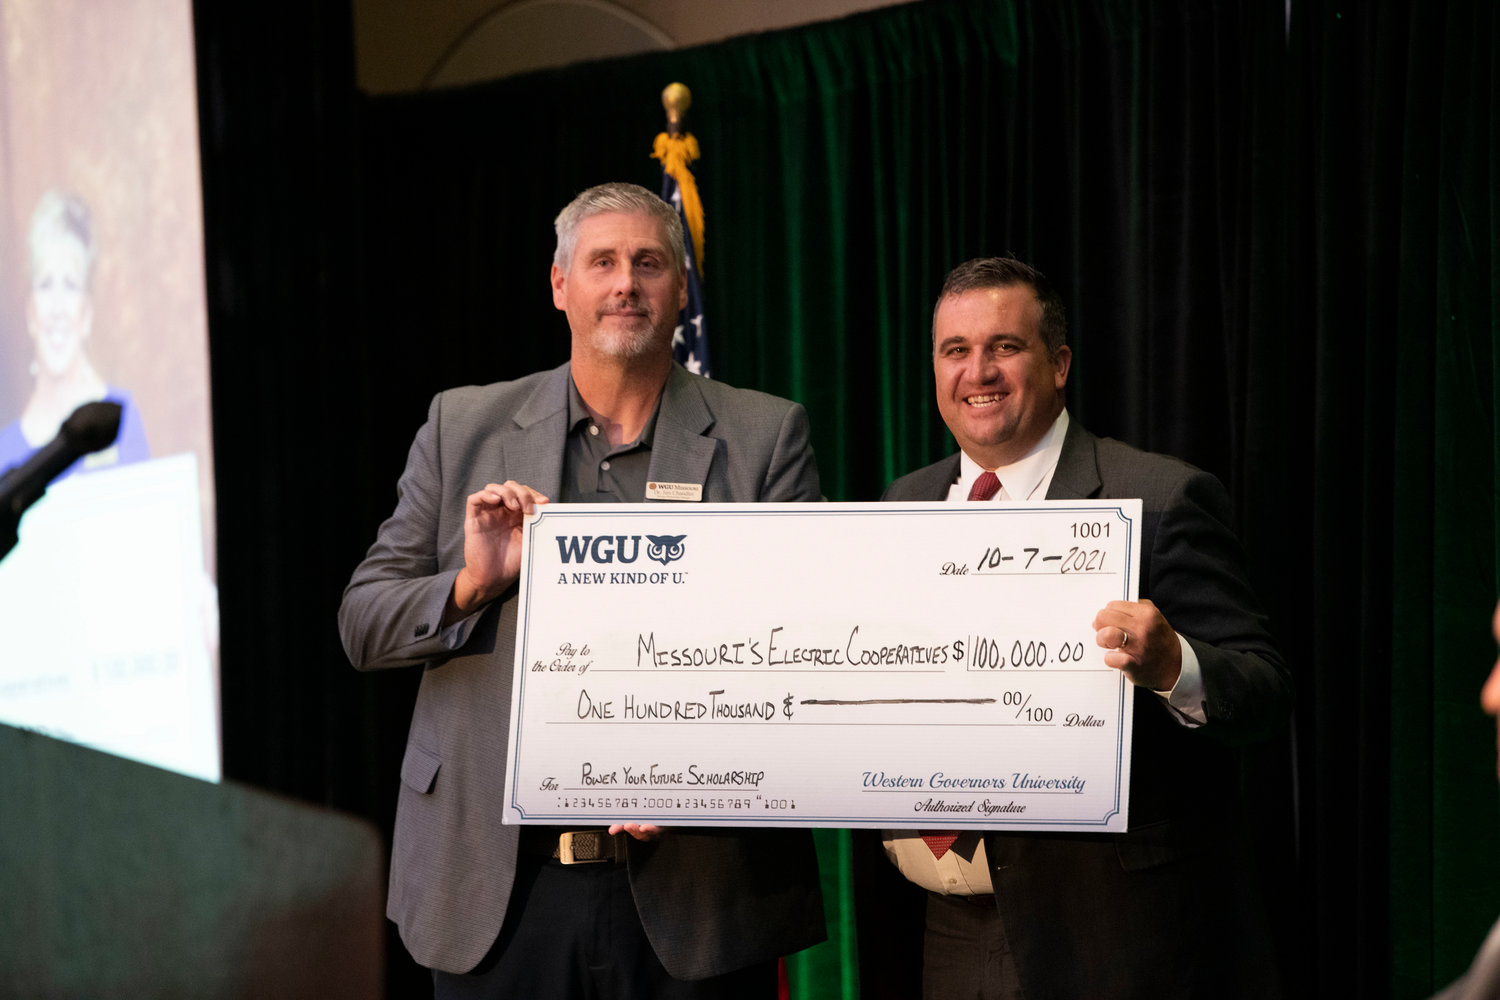 Jim Chandler, left, strategic partnerships manager with WGU Missouri, presents AMEC CEO Caleb Jones, right, with a check for $1 million to fund “Power Your Future” Scholarships for residents throughout the state. The check presentation was made during AMEC’s annual meeting, held in late September. WGU Missouri is working with AMEC to award $100,000 in scholarships to co-op members and employees who are interested in furthering their education. [Submitted Photo]